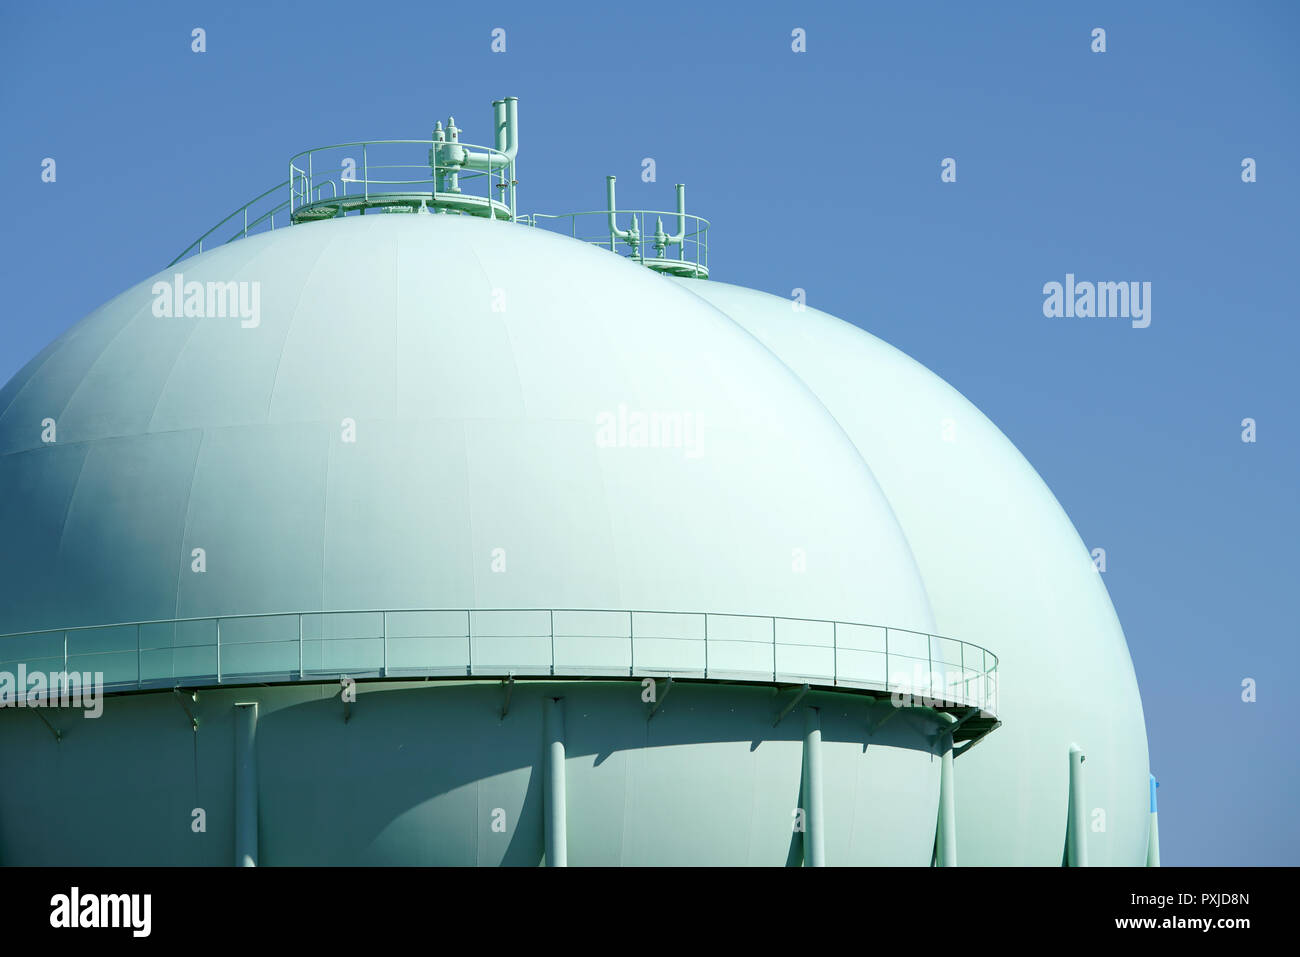 Sphere gas tanks in petrochemical plant against the blue sky Stock Photo